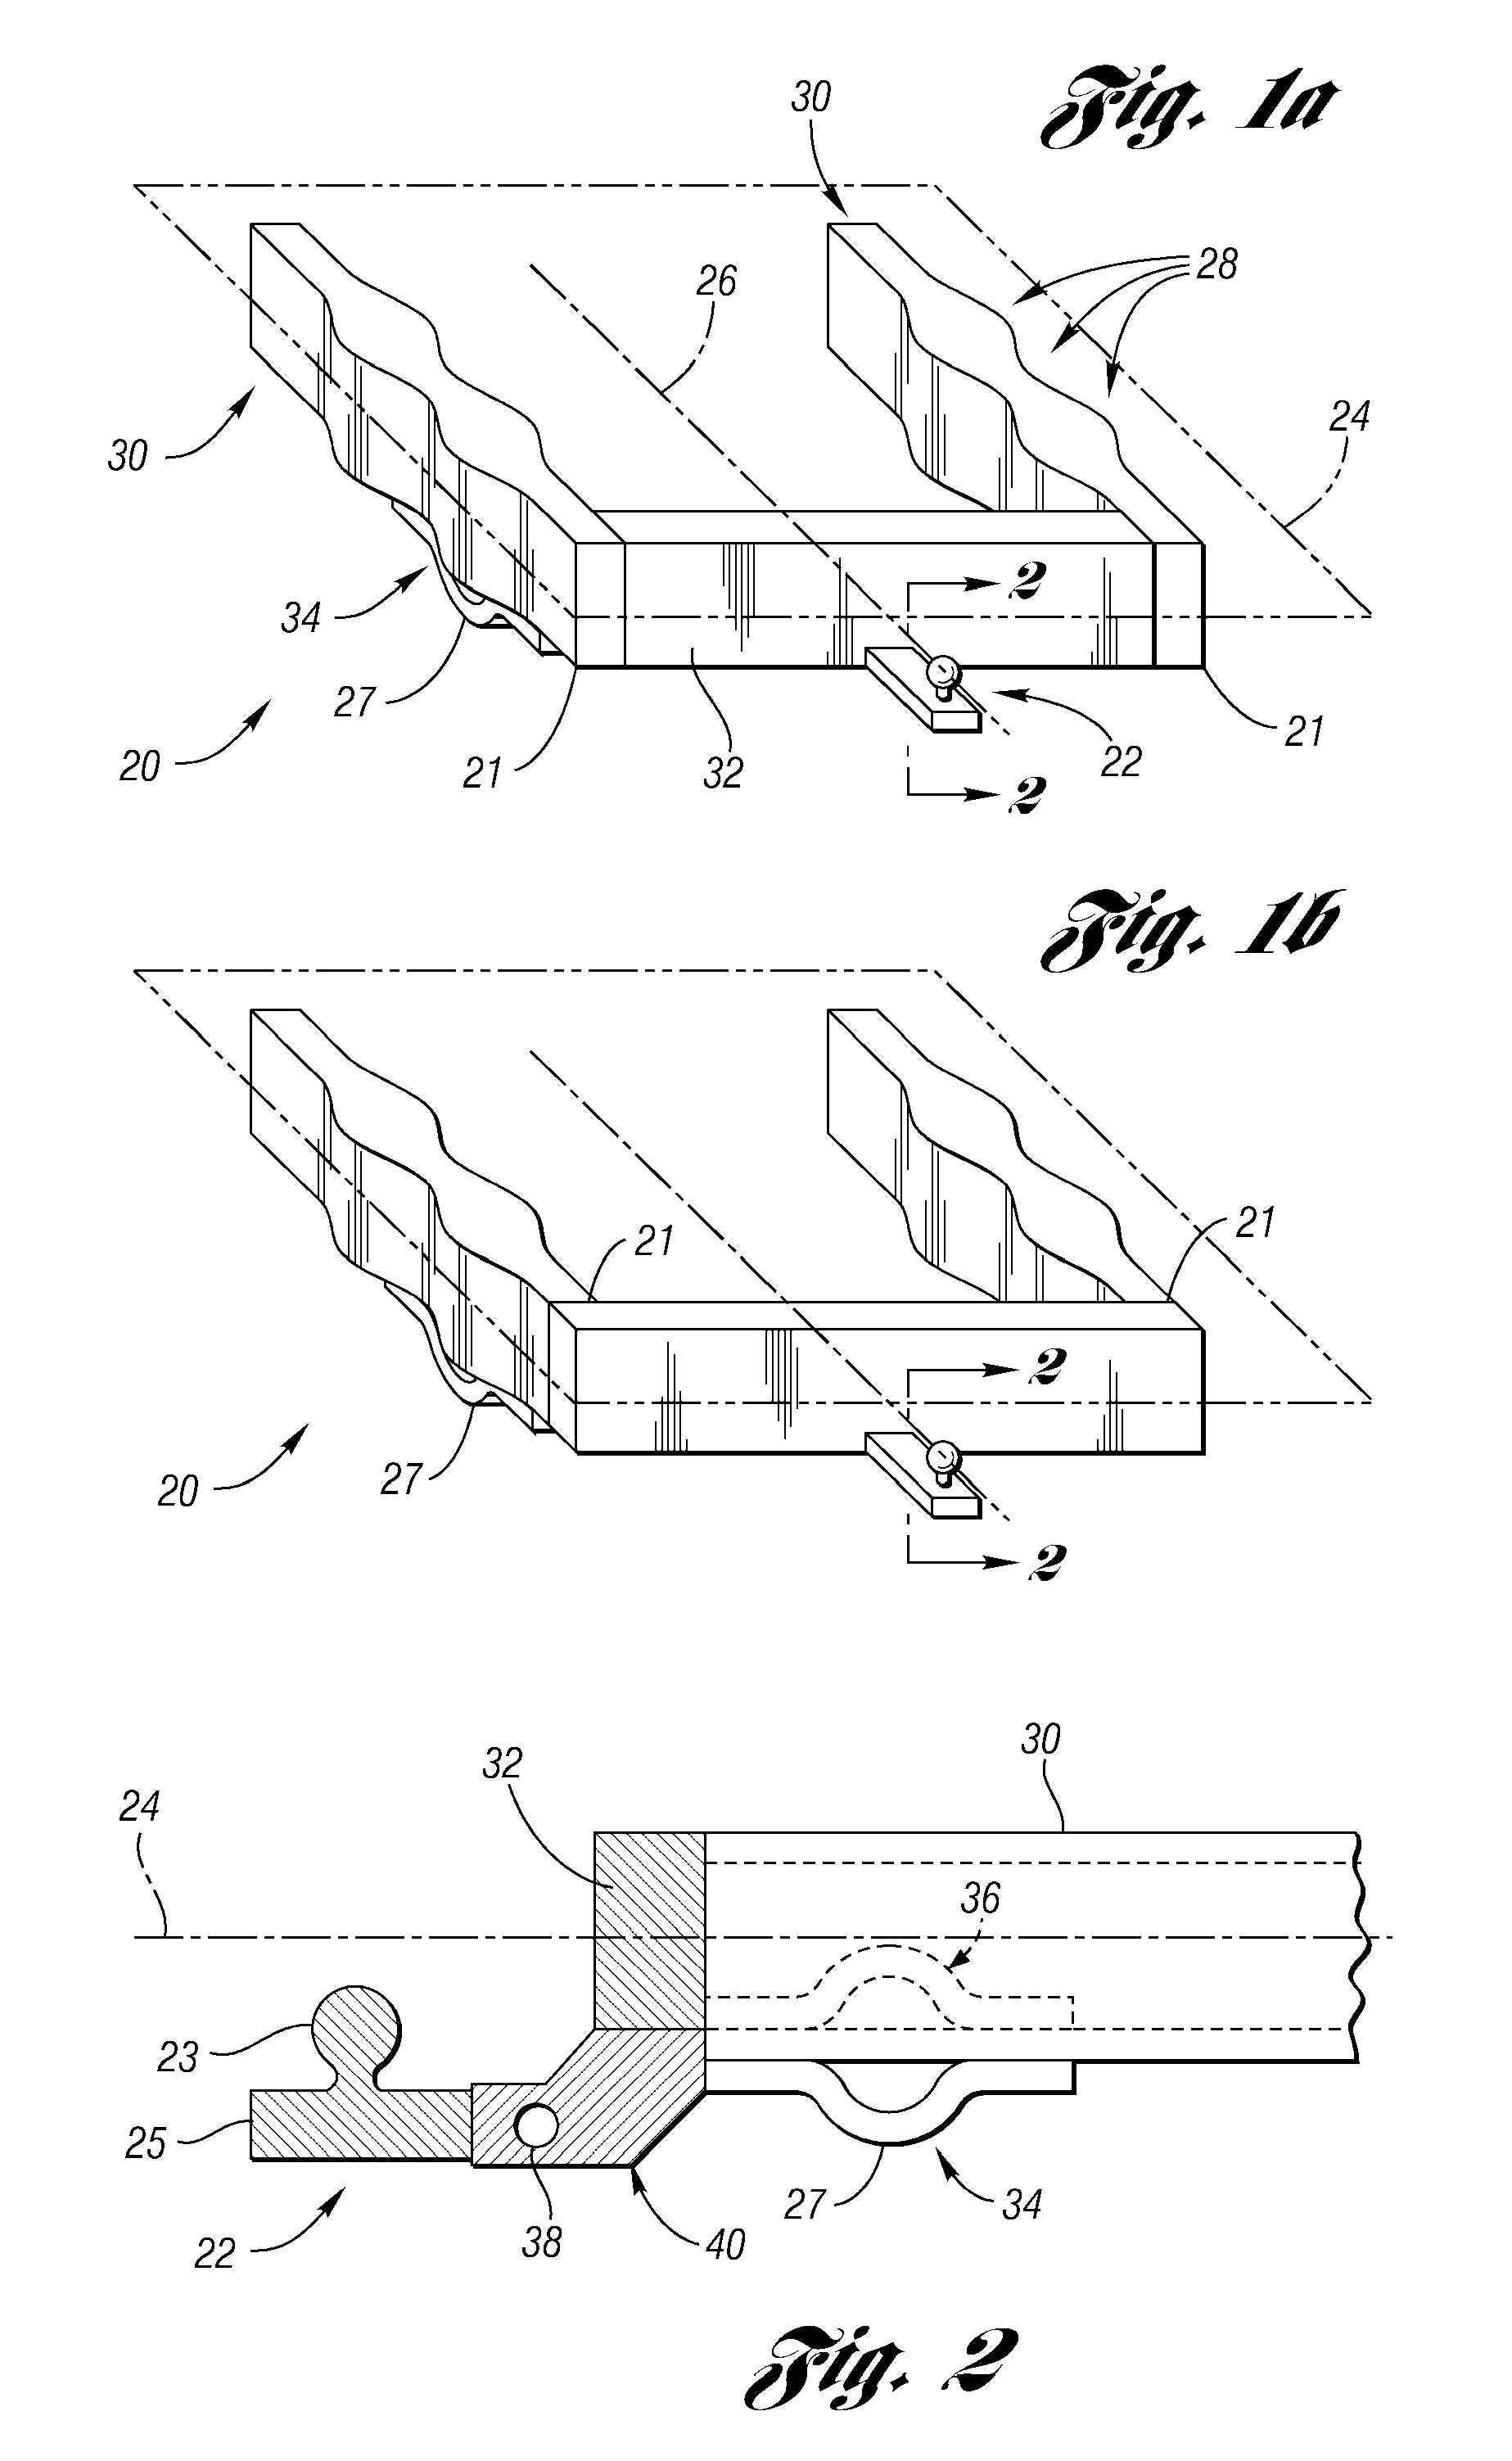 Rear Vehicle Subassembly Having a Towing Hitch Member